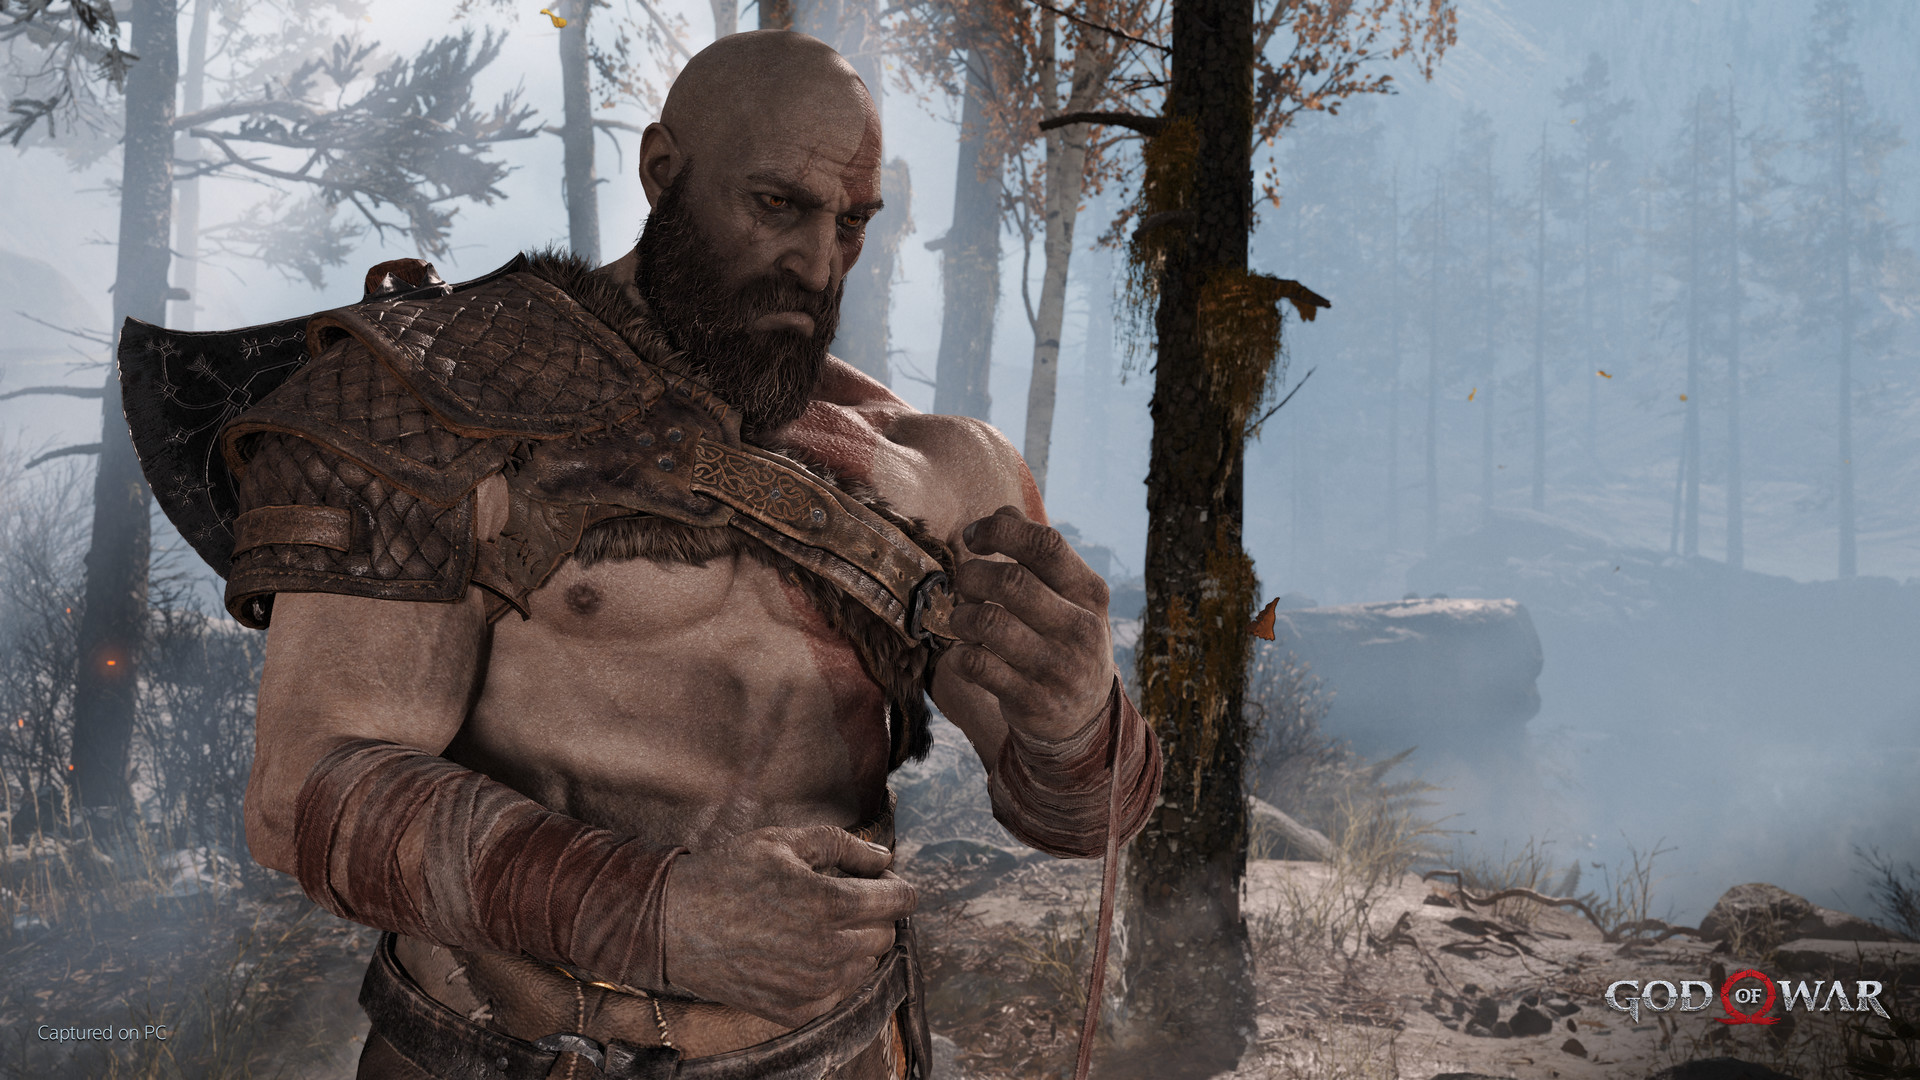 How to play God of War on PC